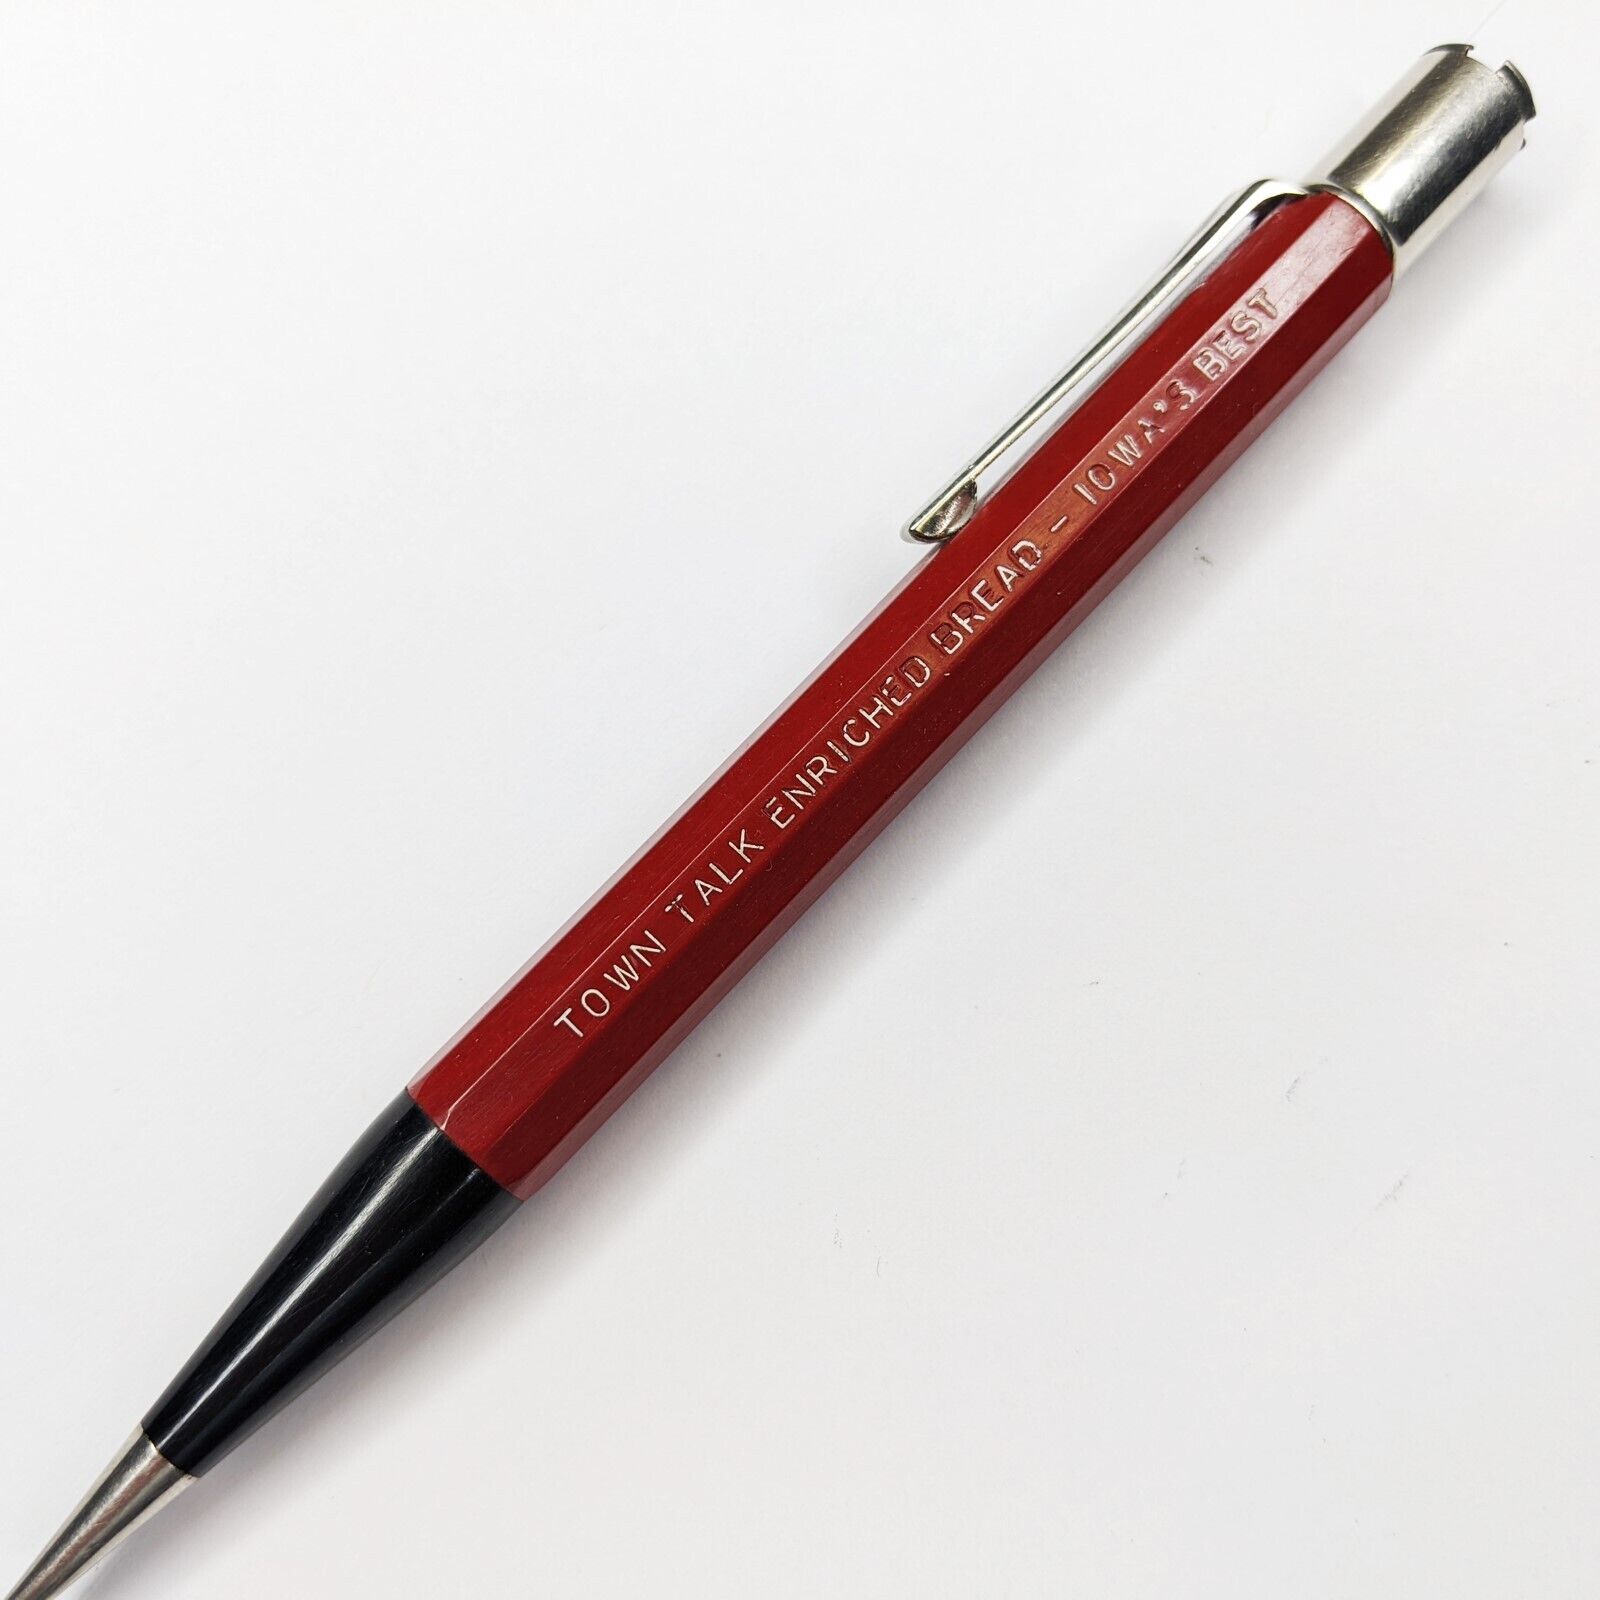 c1940s Iowa Town Talk Enriched Bread Advertising Autopoint Mechanical Pencil G41